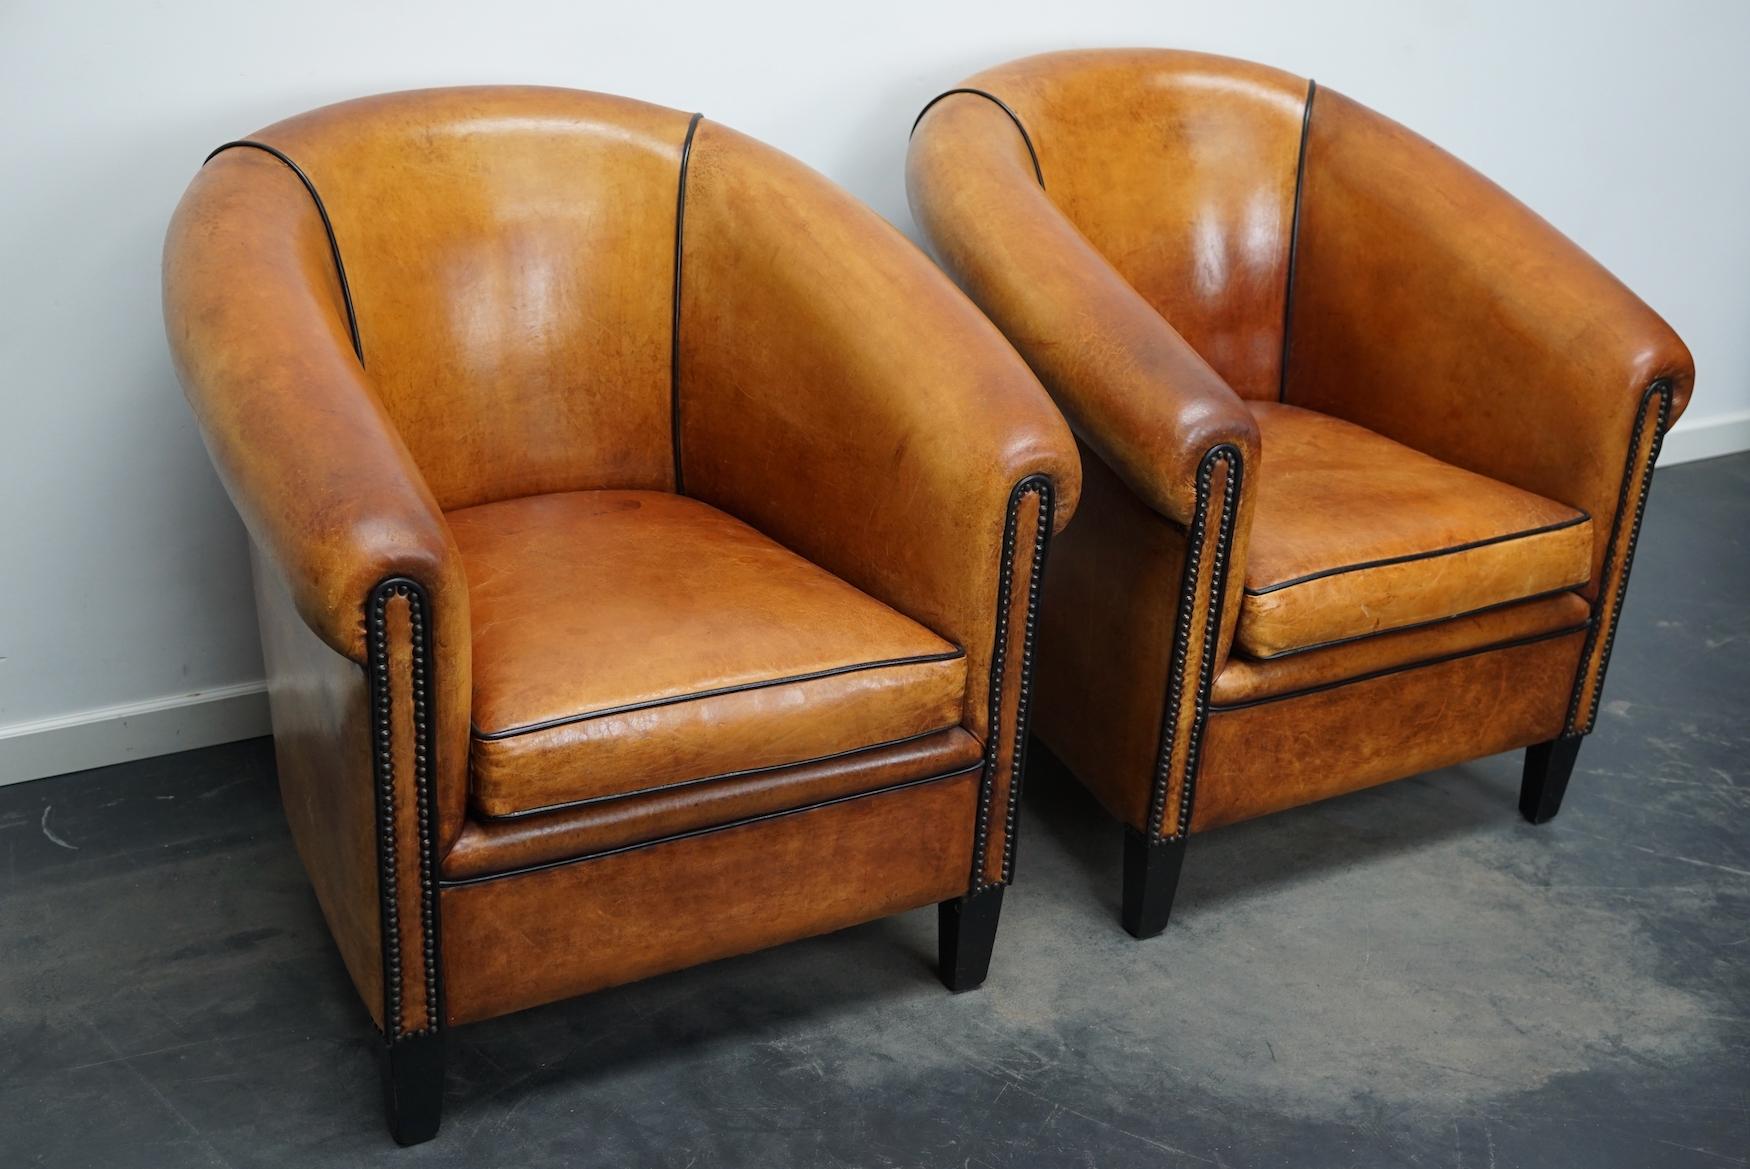 This pair of cognac-colored leather club chairs come from the Netherlands. They are upholstered with hand patinated leather and feature black piping and wooden legs.